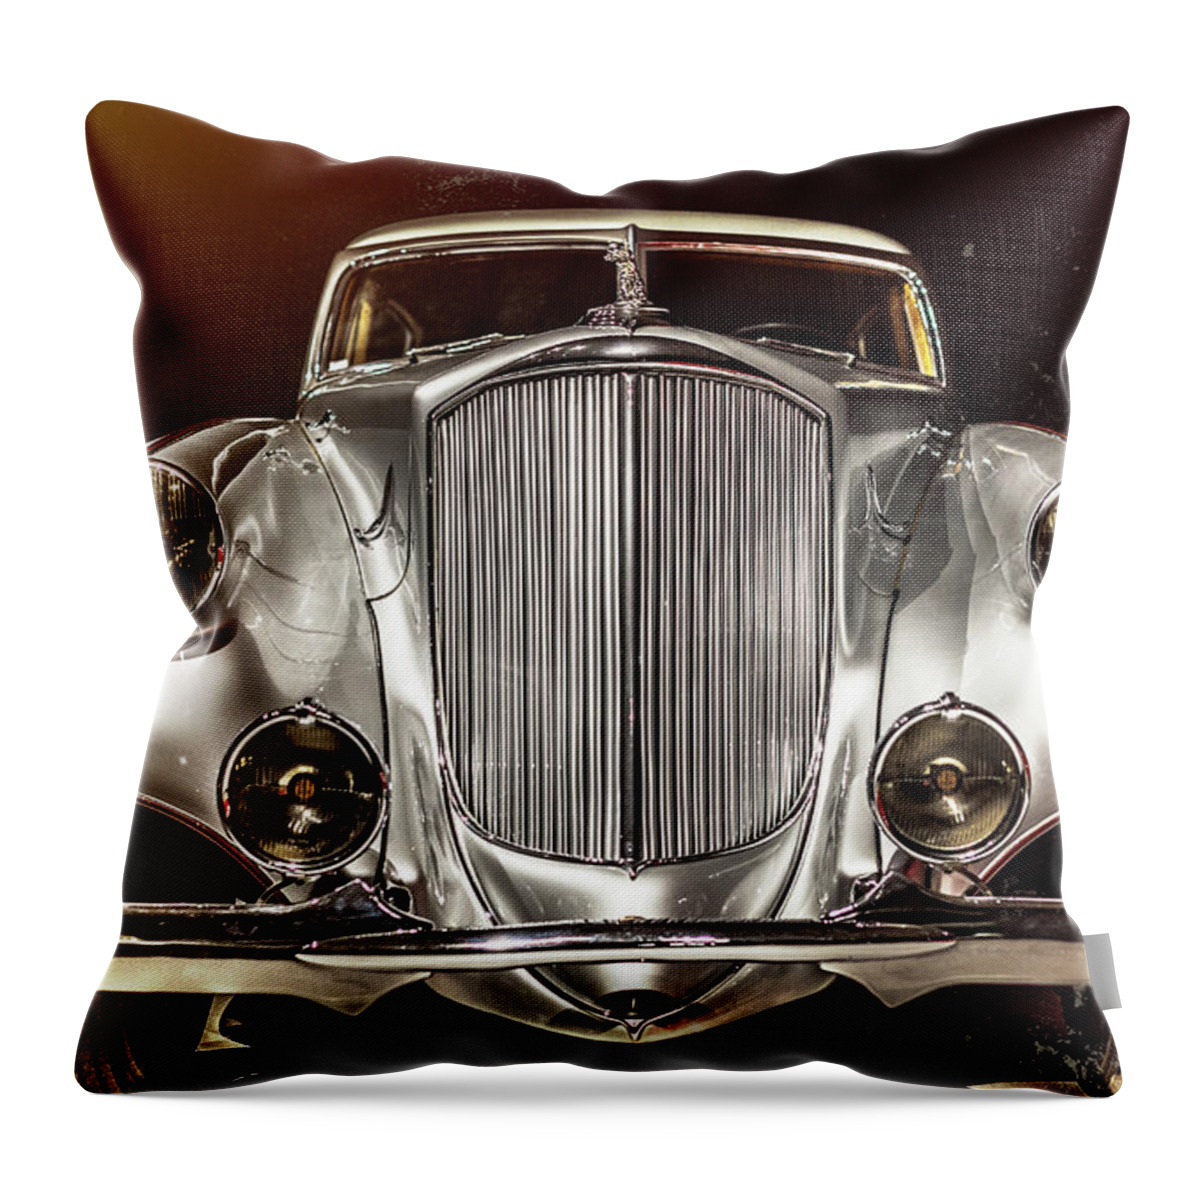 2016 Throw Pillow featuring the photograph 1933 Pierce-Arrow Silver Arrow Front View by Wade Brooks